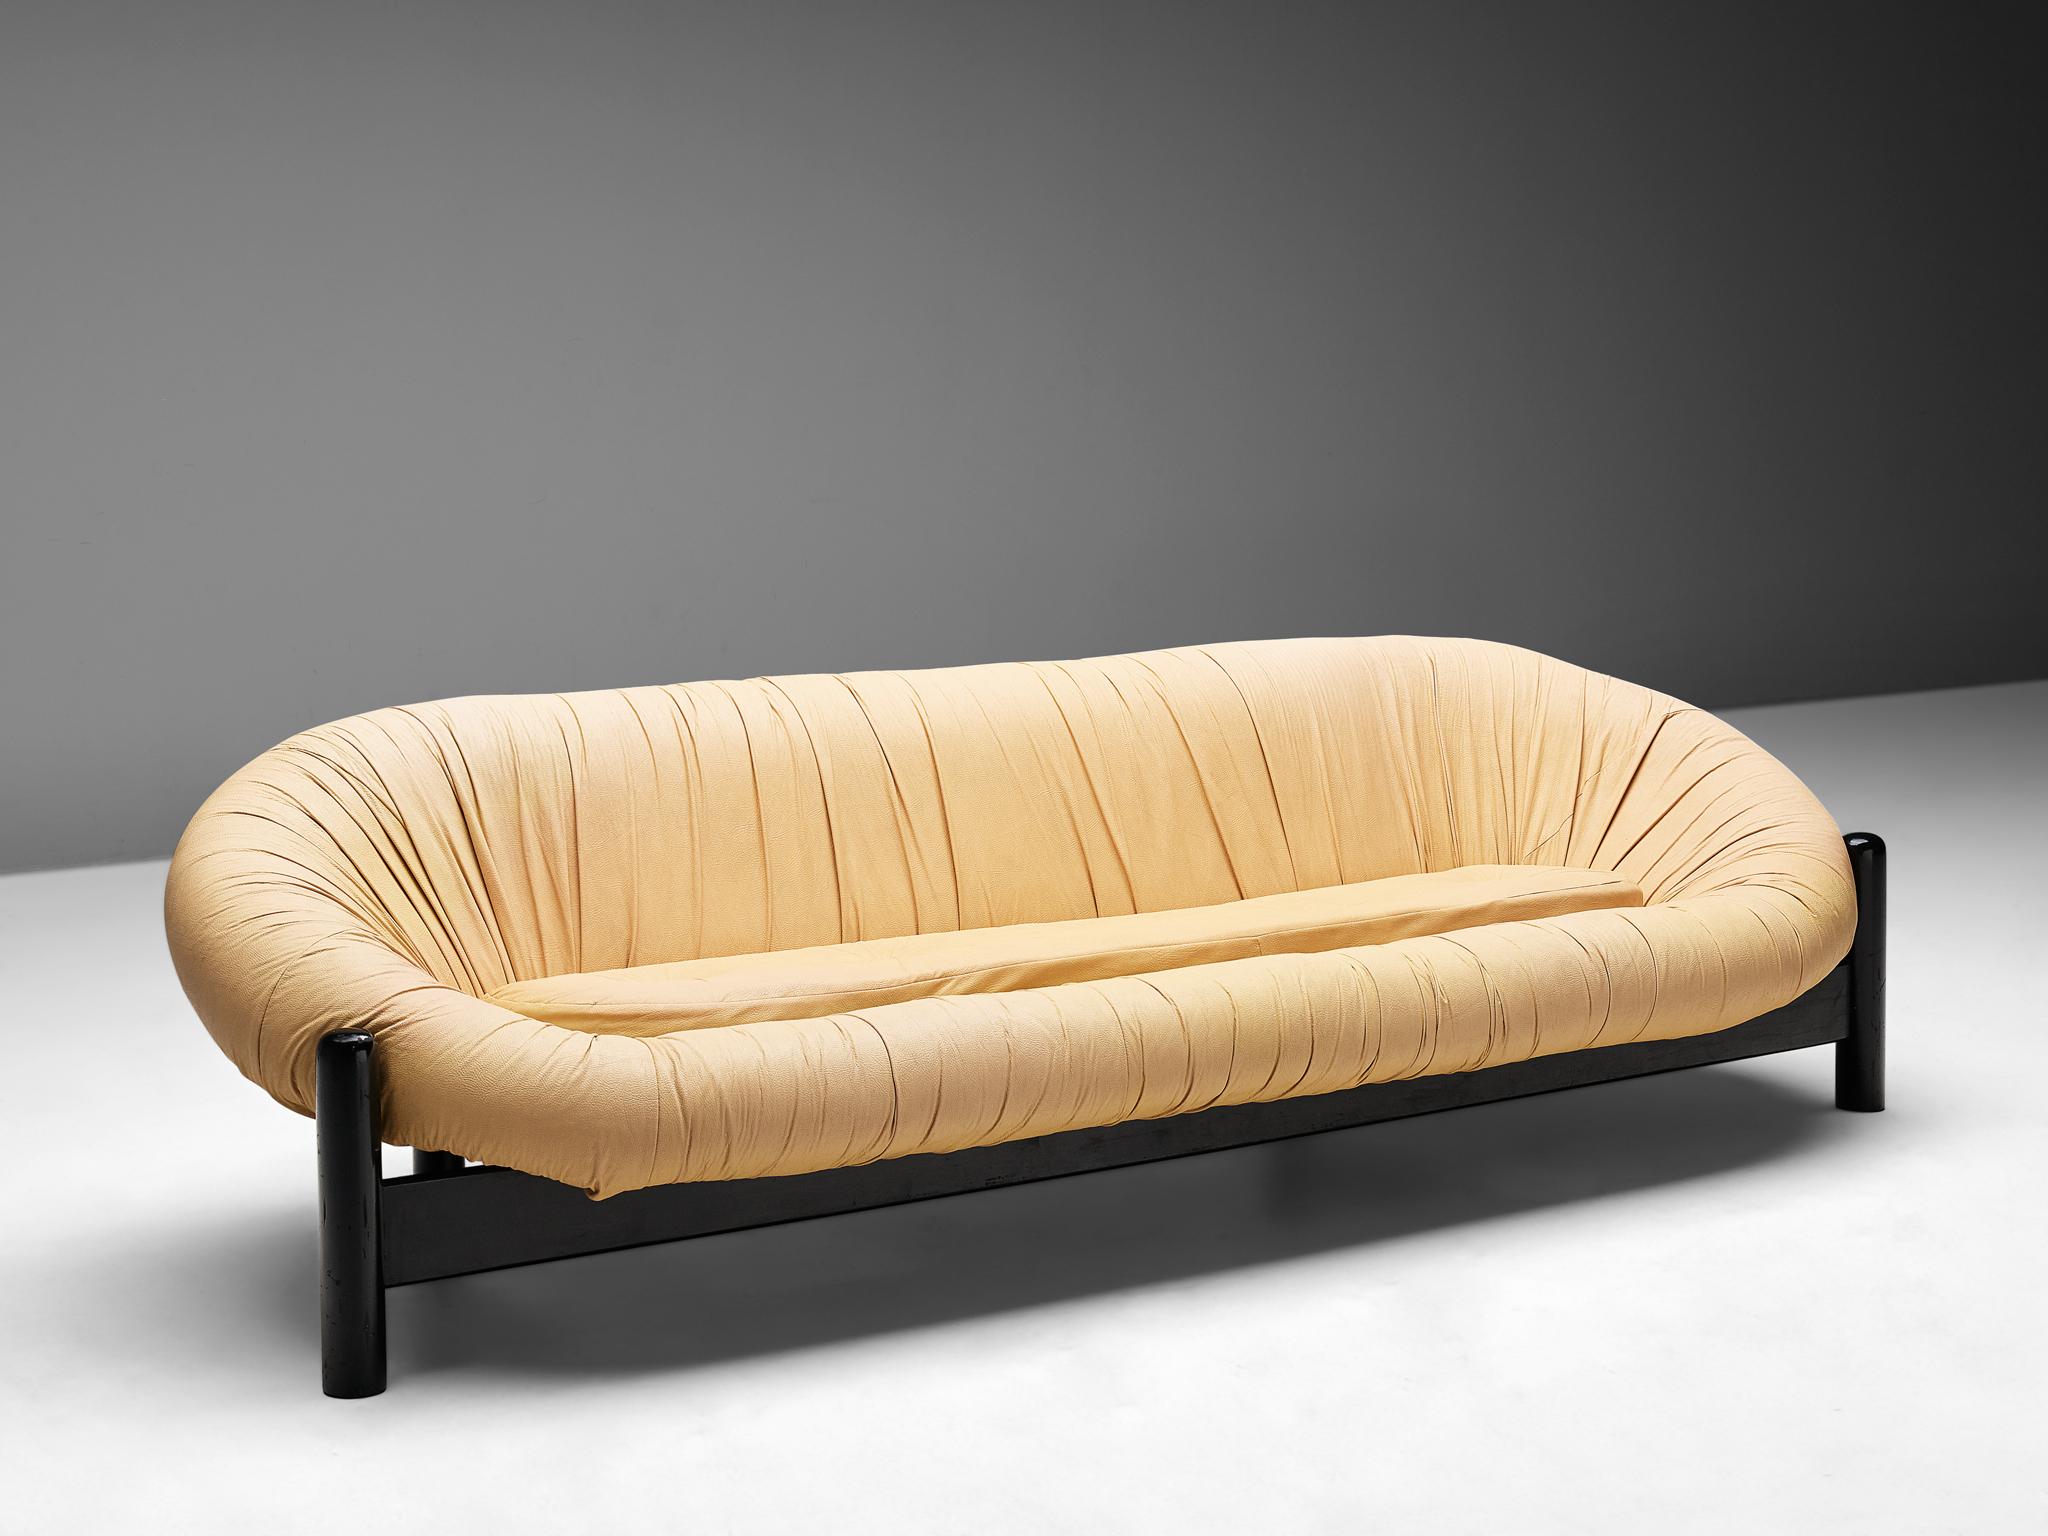 Sofa, lacquered wood, leatherette, Brazil, 1970s.

Monumental and post modern sofa made in Brazil in the 1970s. This sofa consists of a large frame and seat out of one piece, upholstered with light yellow leatherette. The seat has a tufted pillow